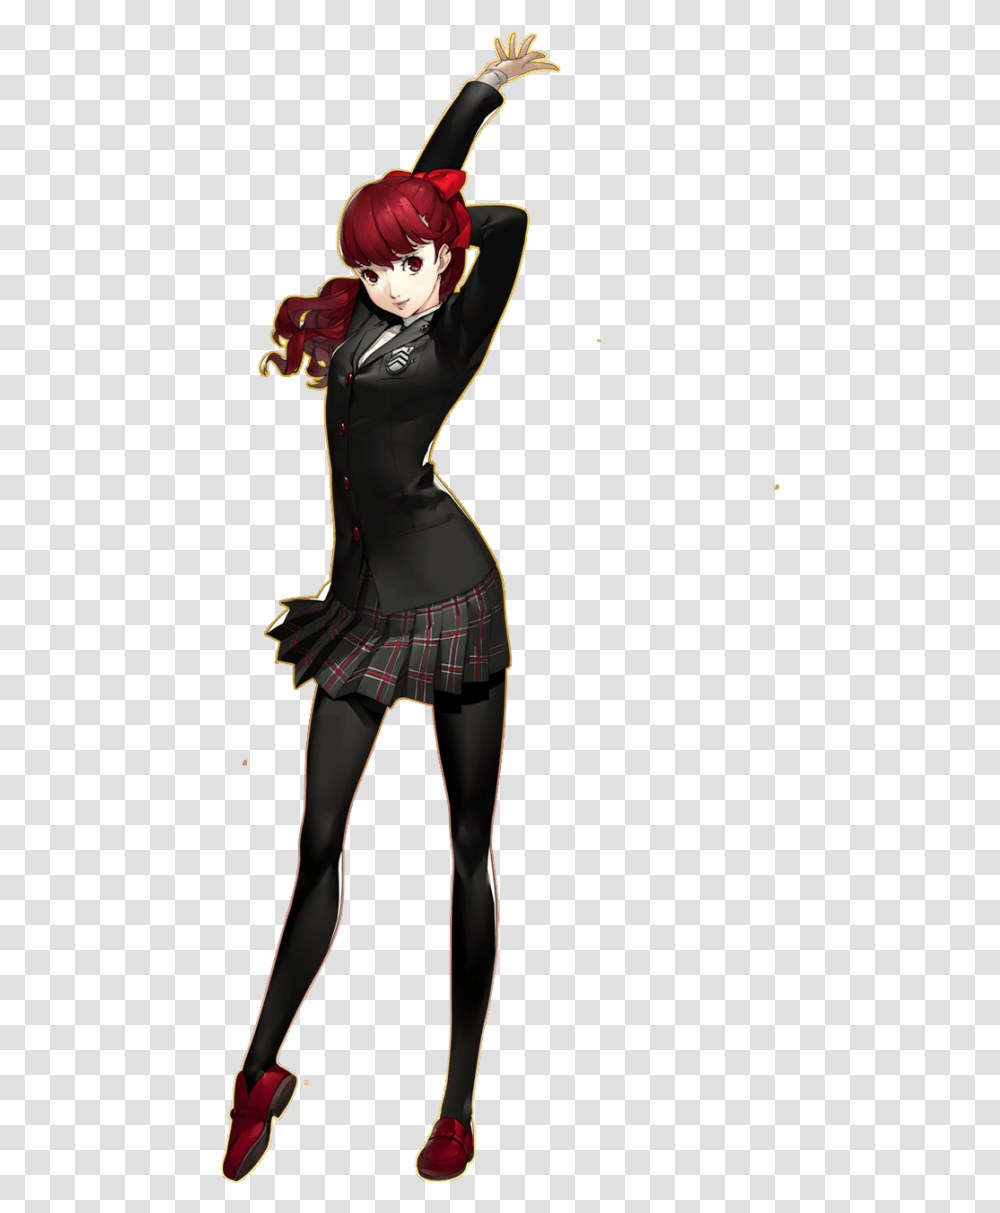 Persona 5 The Royal Is An Enhanced Version Of Kasumi Persona 5, Dance Pose, Leisure Activities, Performer, Clothing Transparent Png